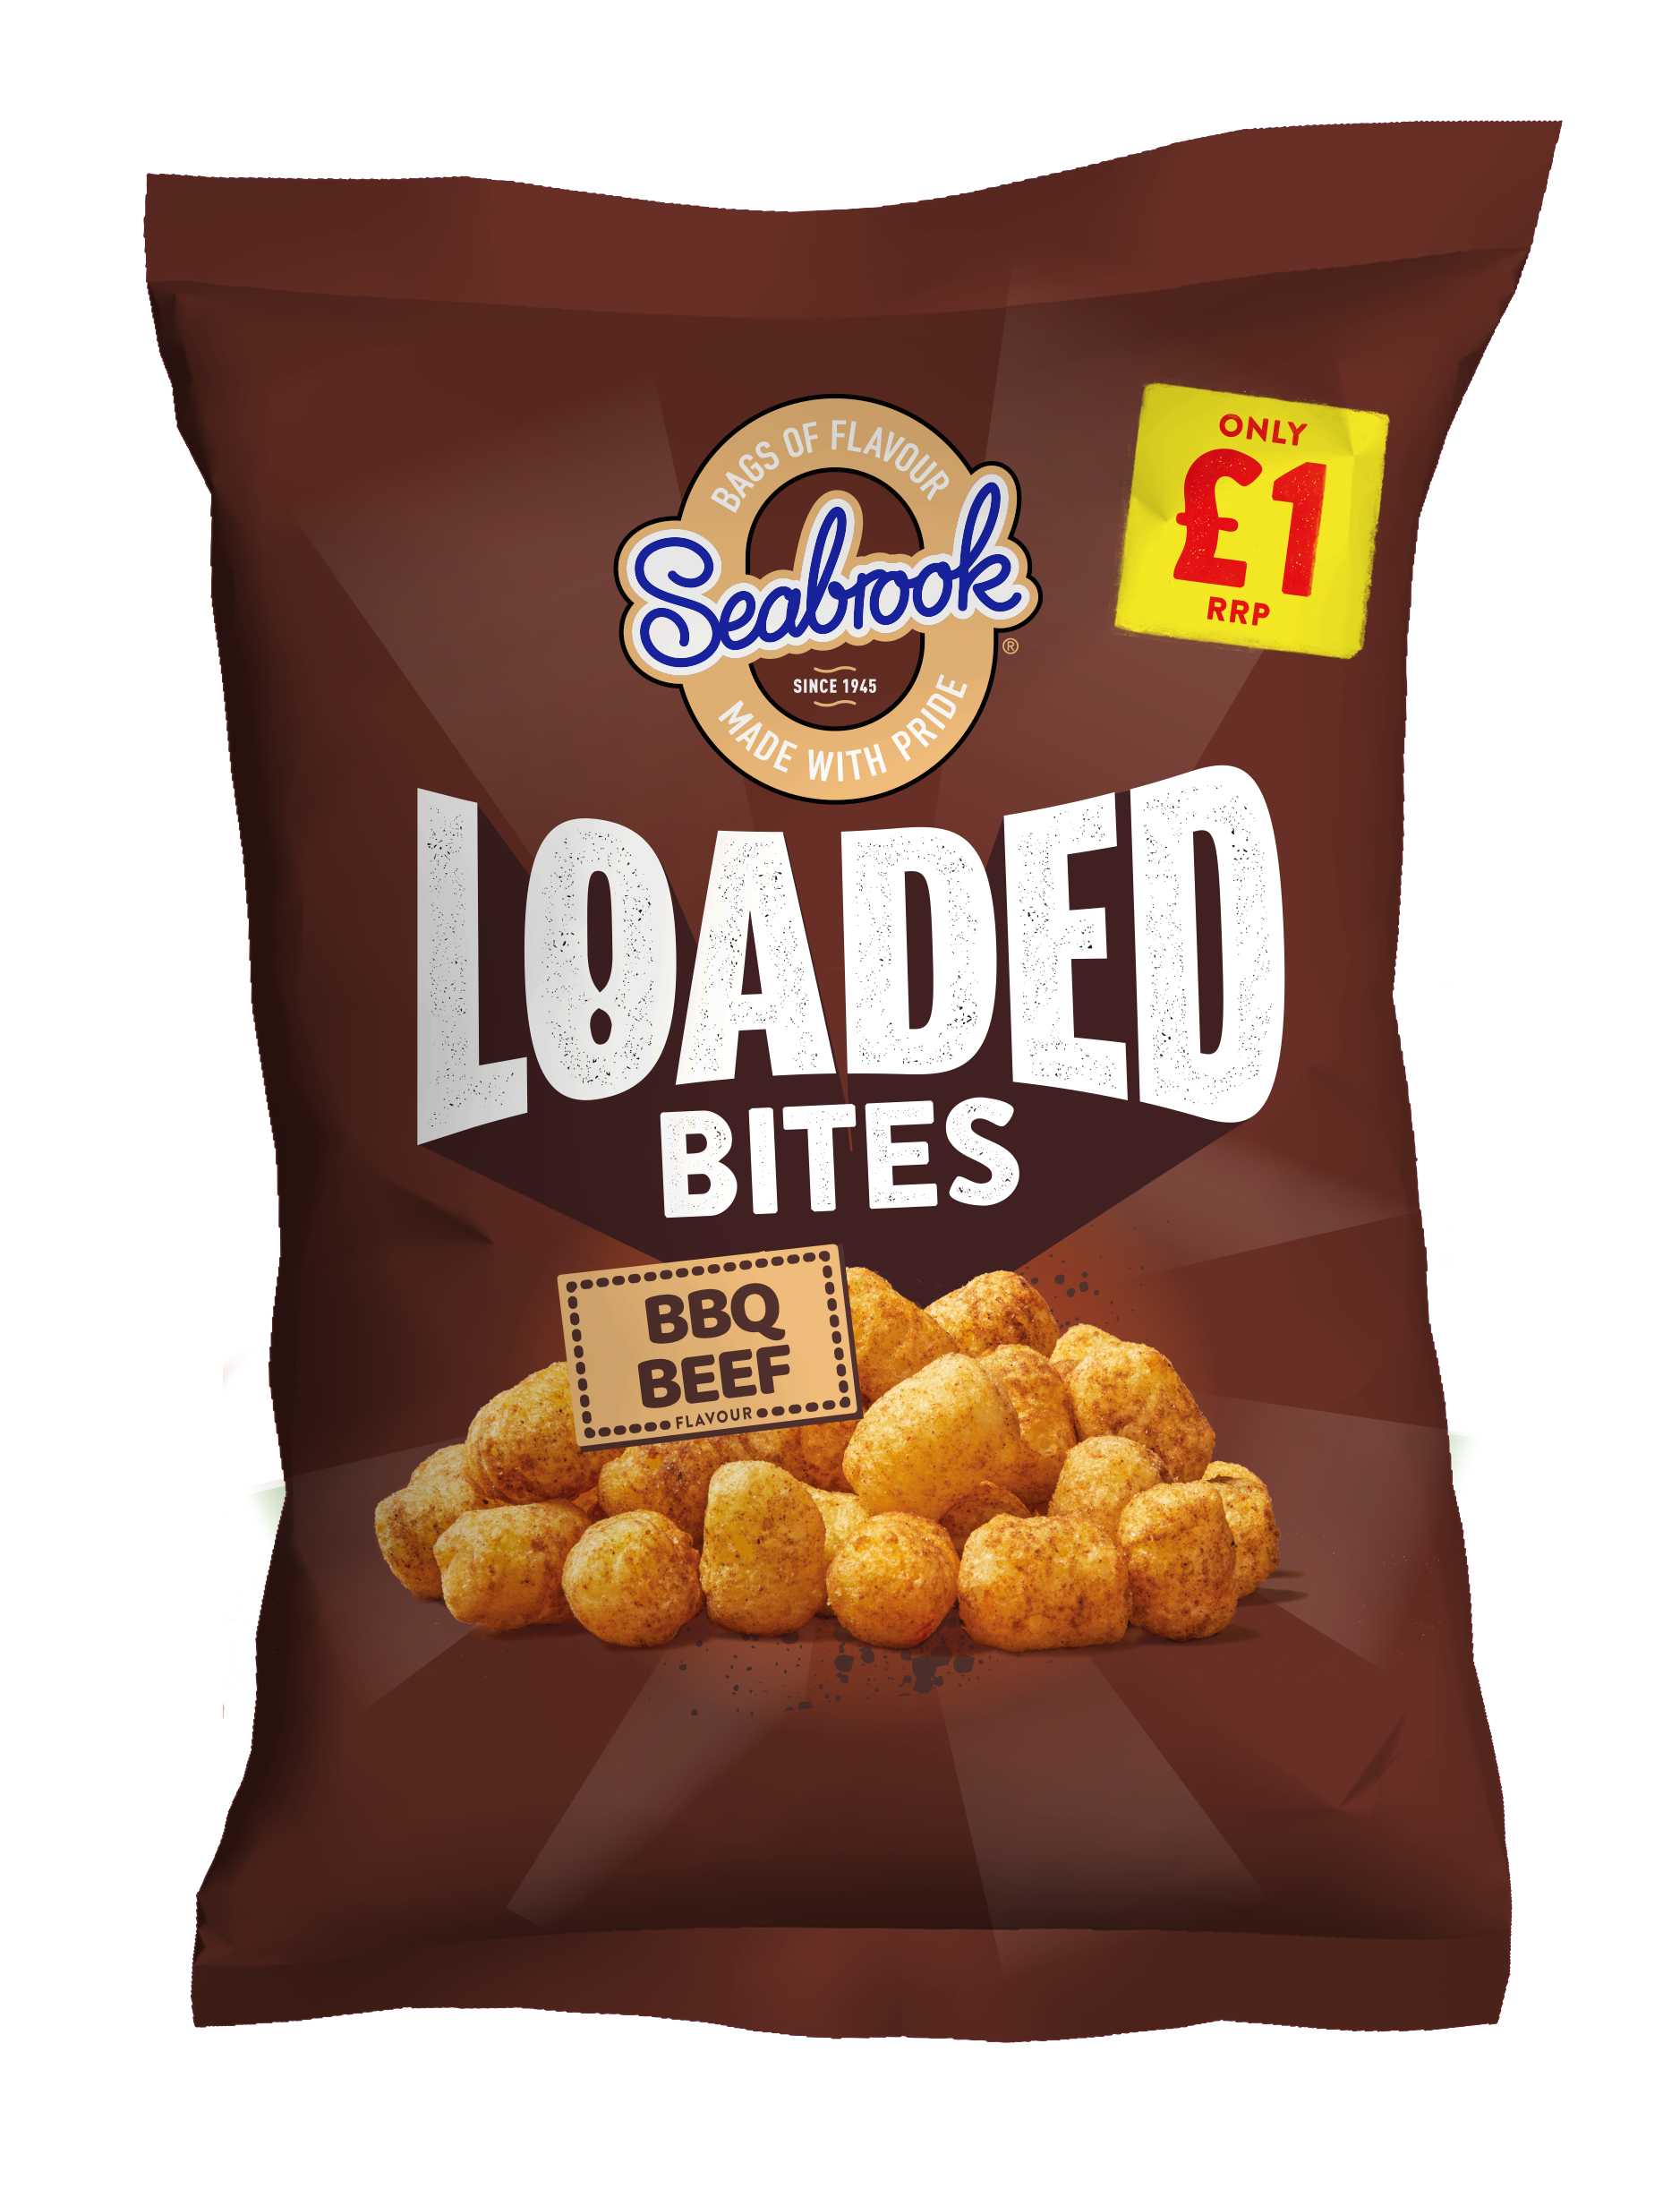 Calbee UK expands Loaded range under the Seabrook brand